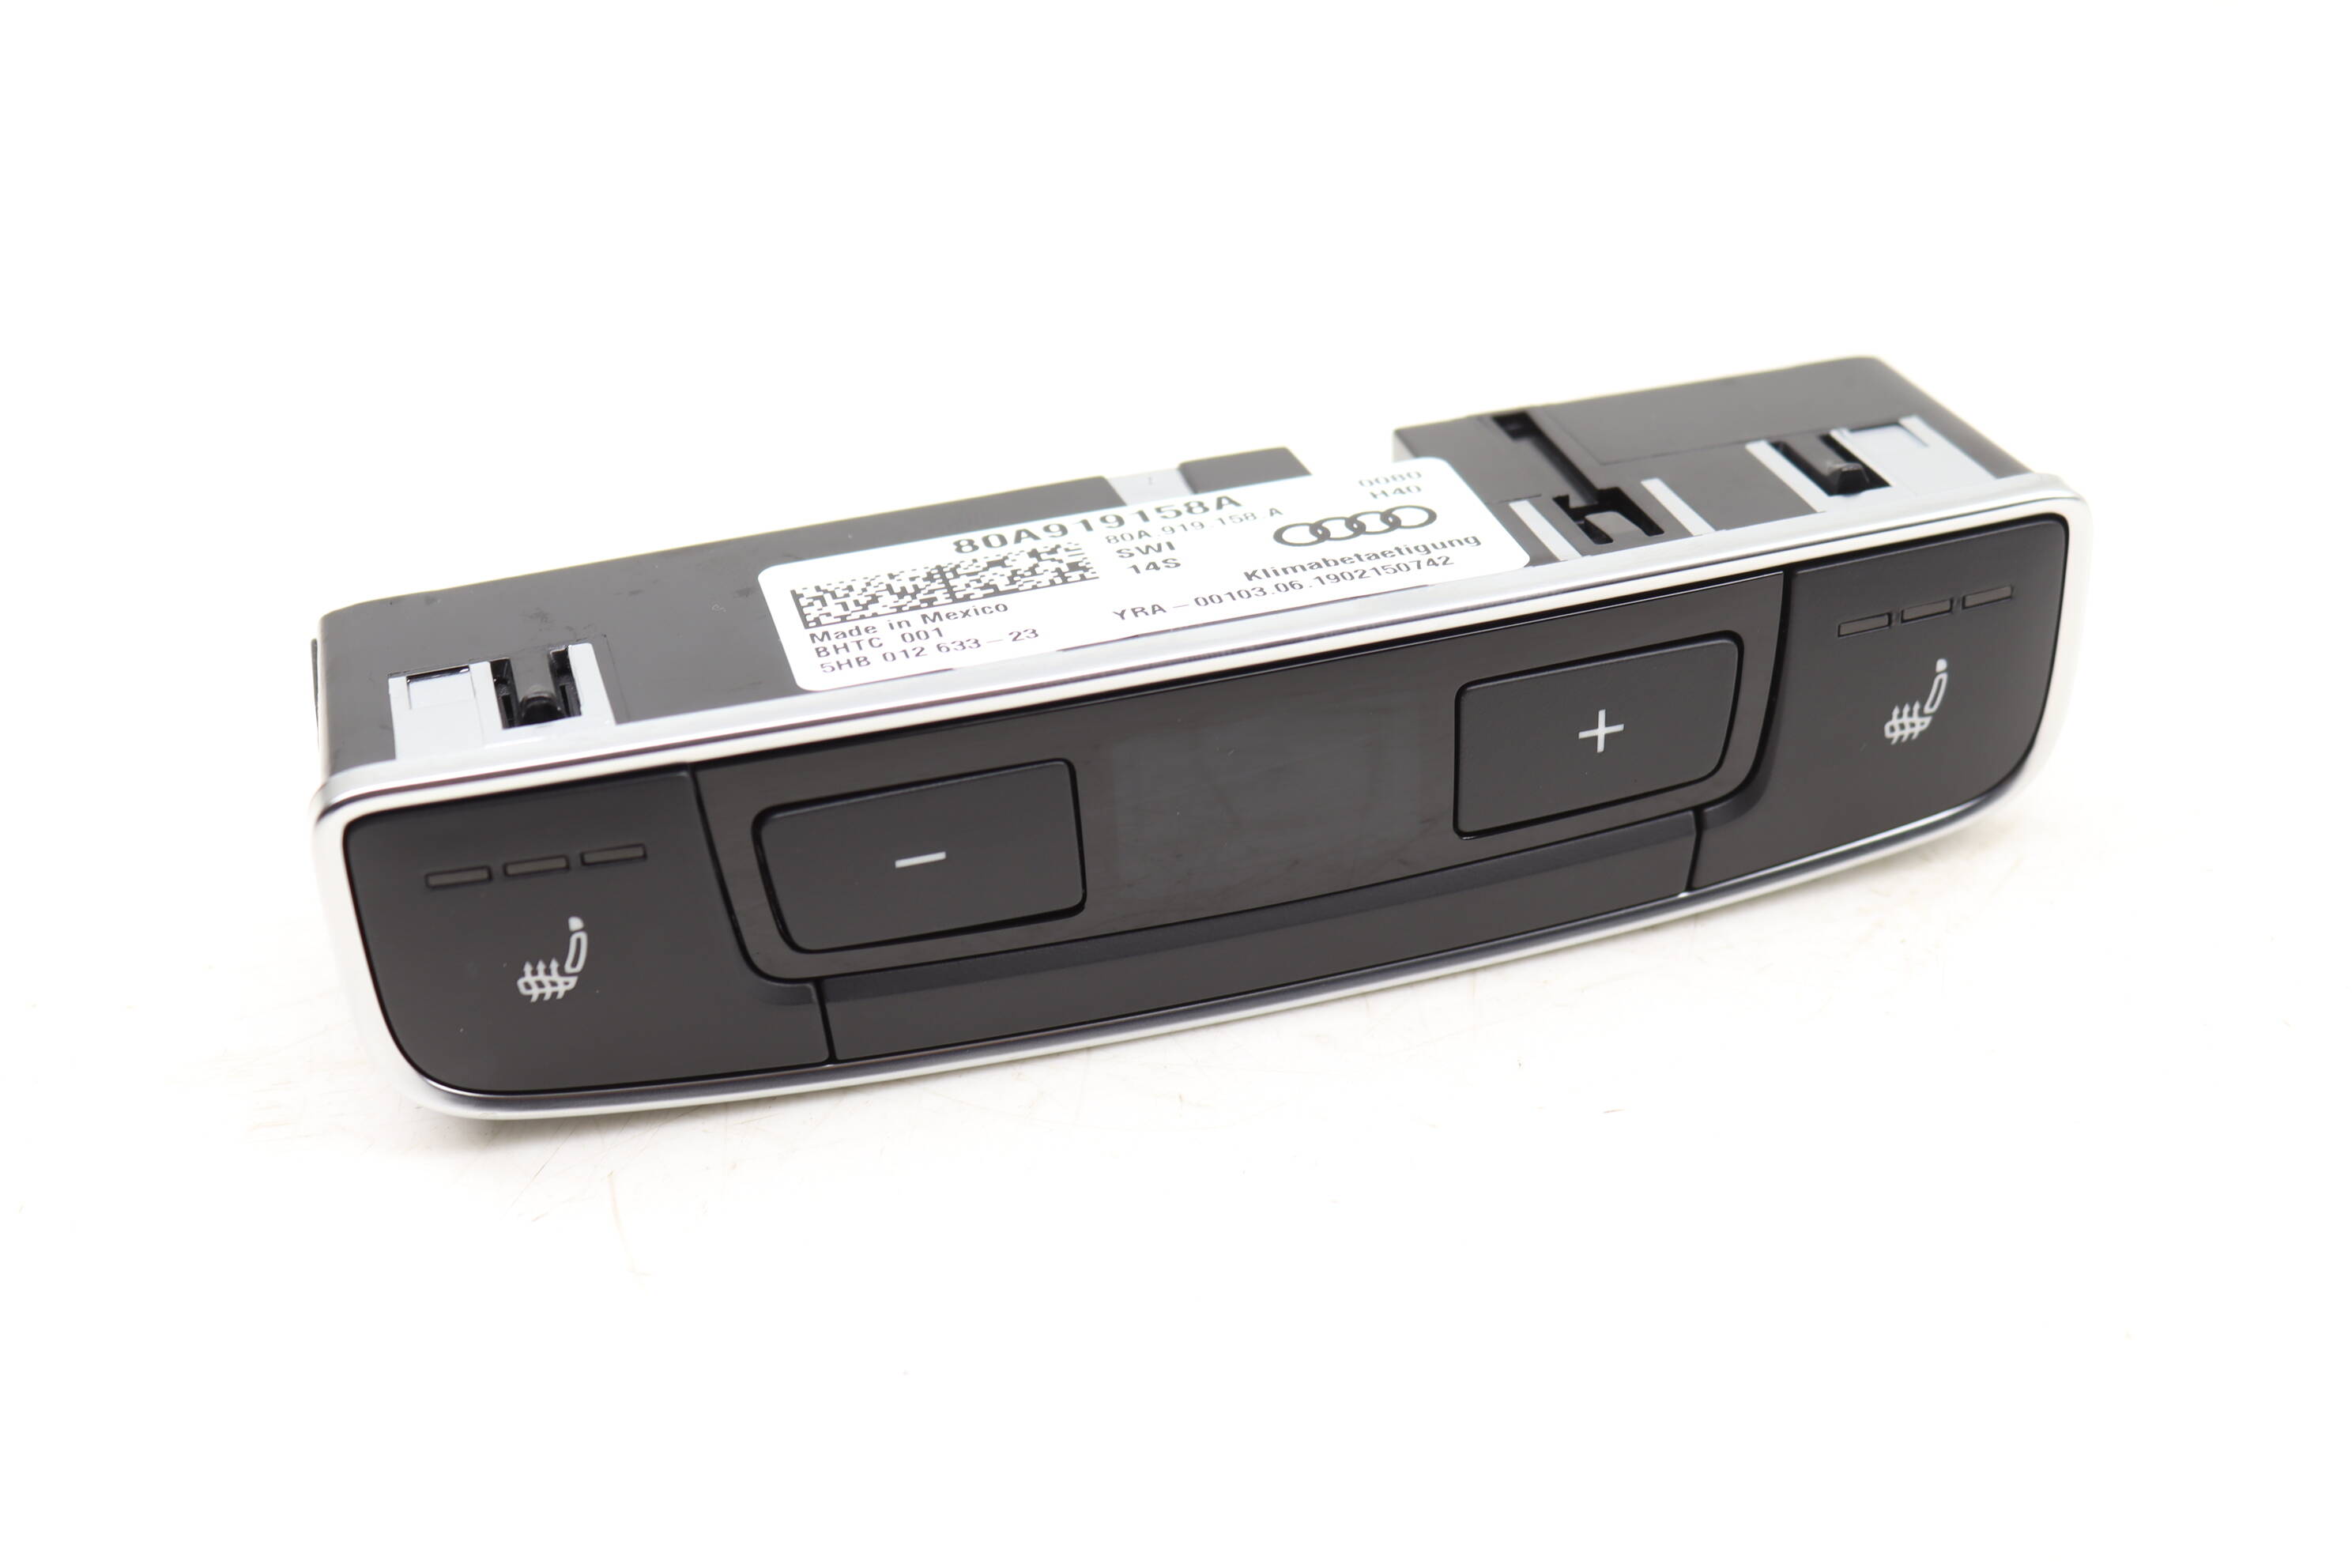 LCD Display For Seat Leon//Cordoba, Air Conditioning Control Unit